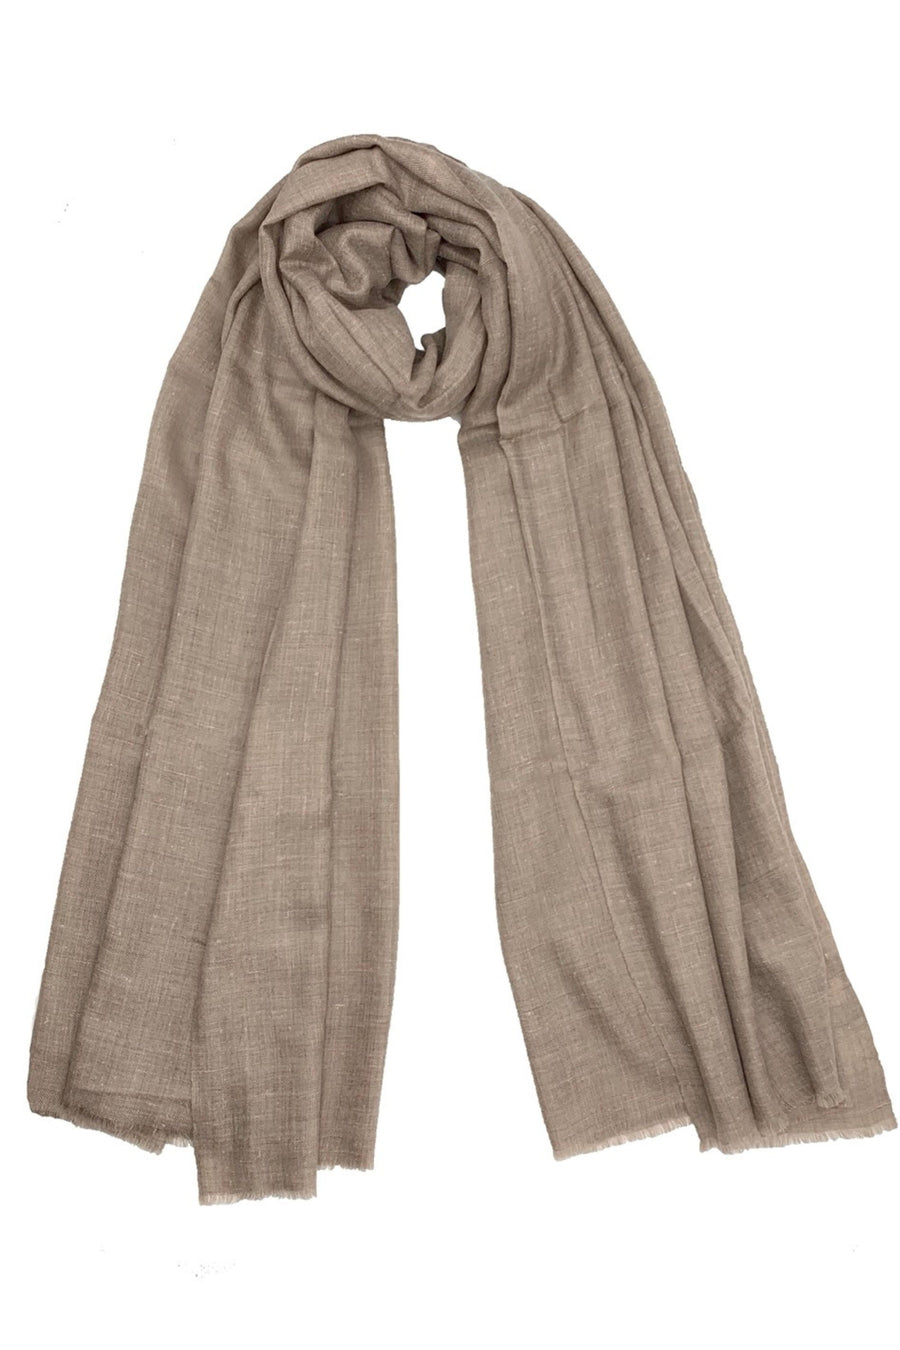 THE LARGE HANDWOVEN CASHMERE SCARF | Beige